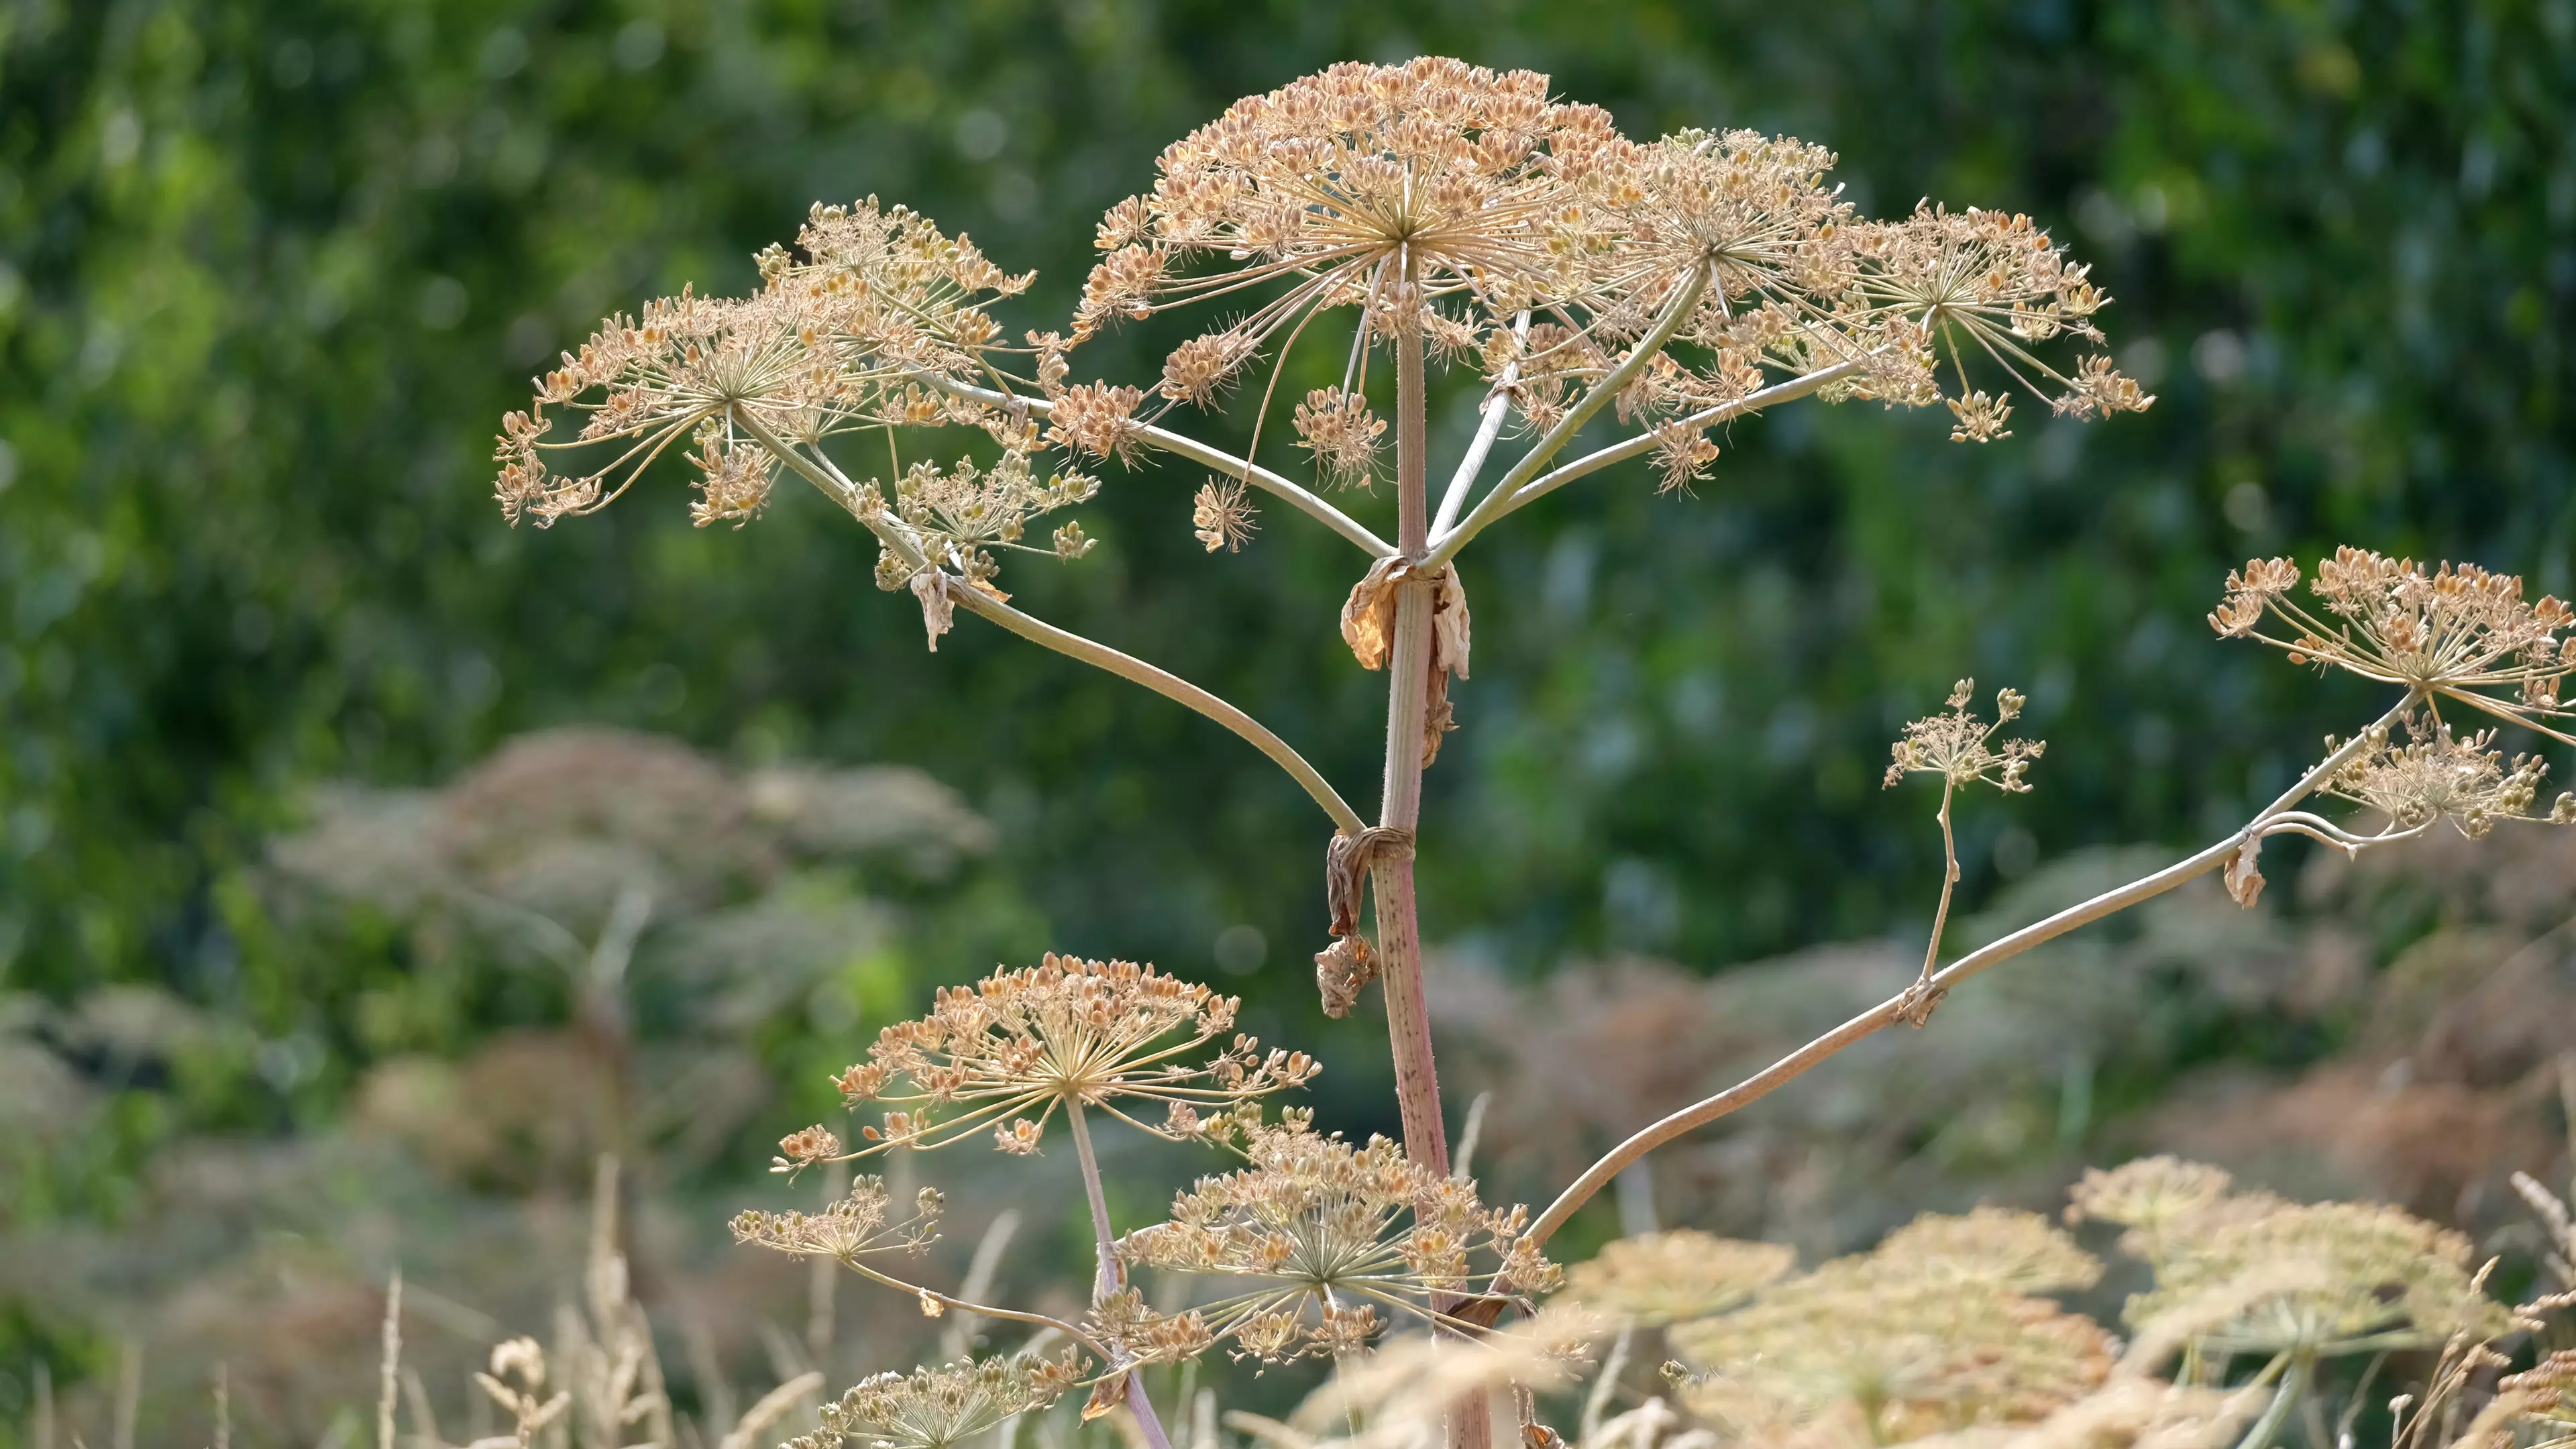 Five-Year-Old Girl Left With Severe Blisters After Brush With Giant Hogweed